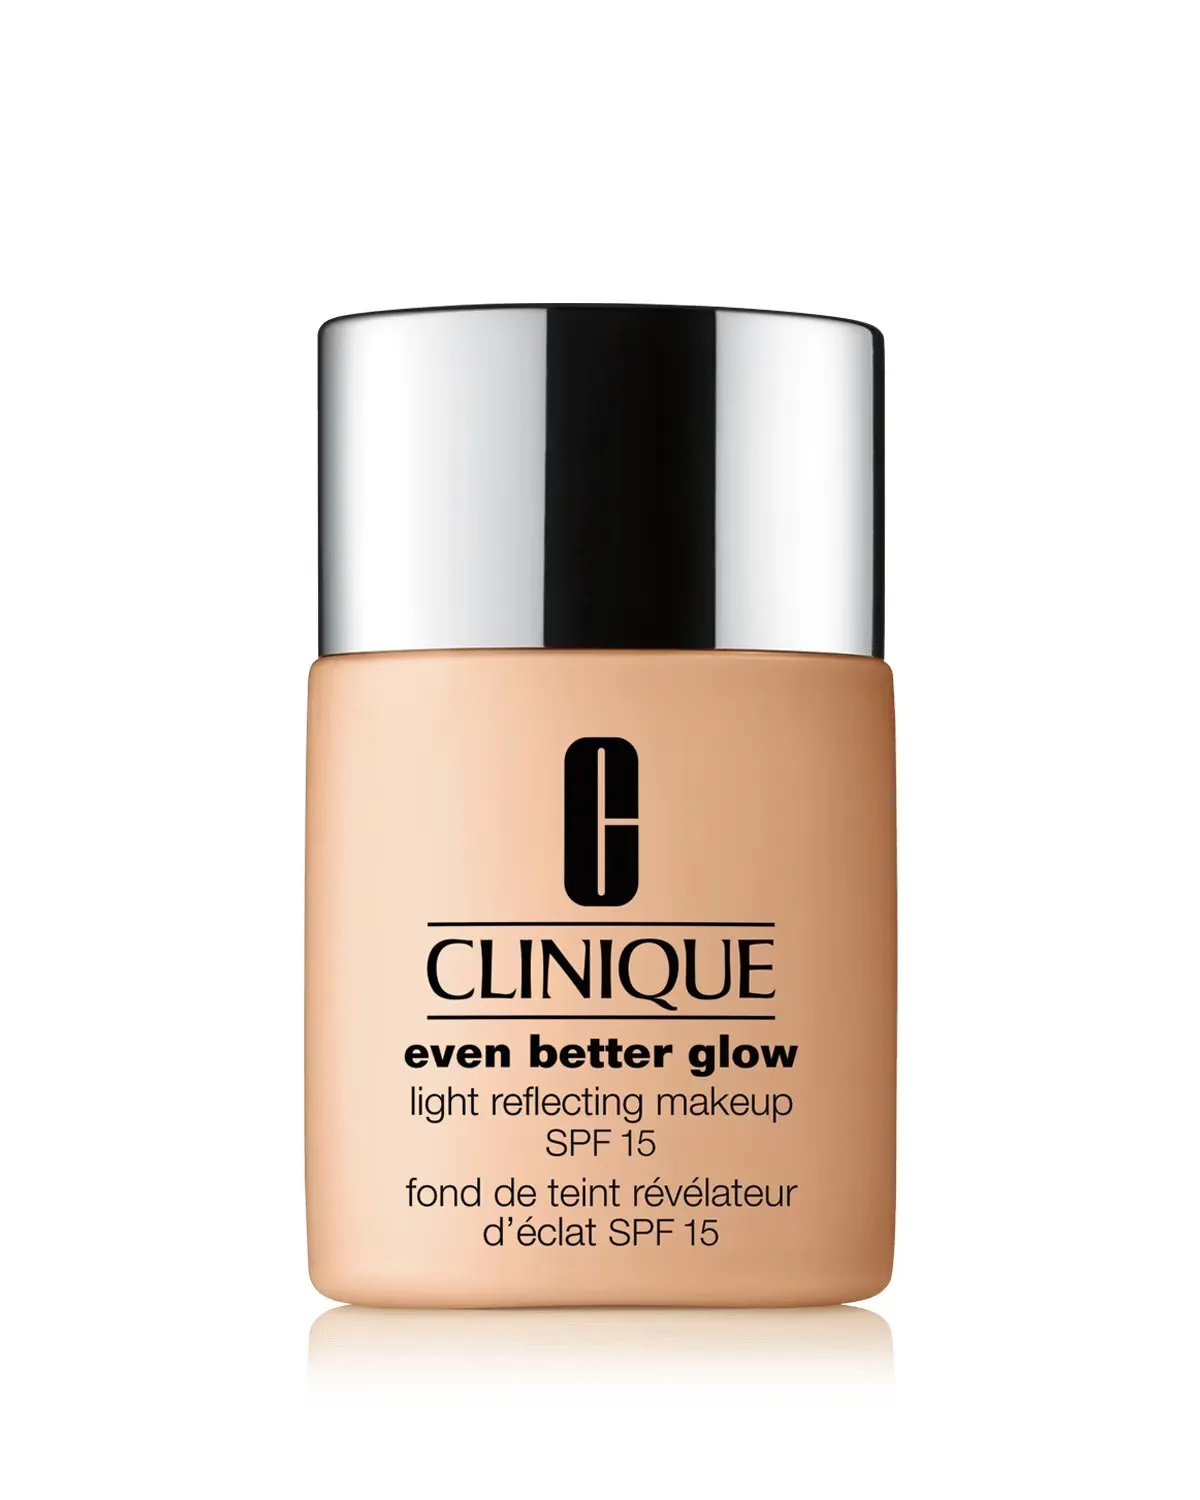 FEMMENORDIC's choice in the Clinique Even Better vs Even Better Glow comparison, the Clinique Even Better Glow Light Reflecting Makeup SPF15.